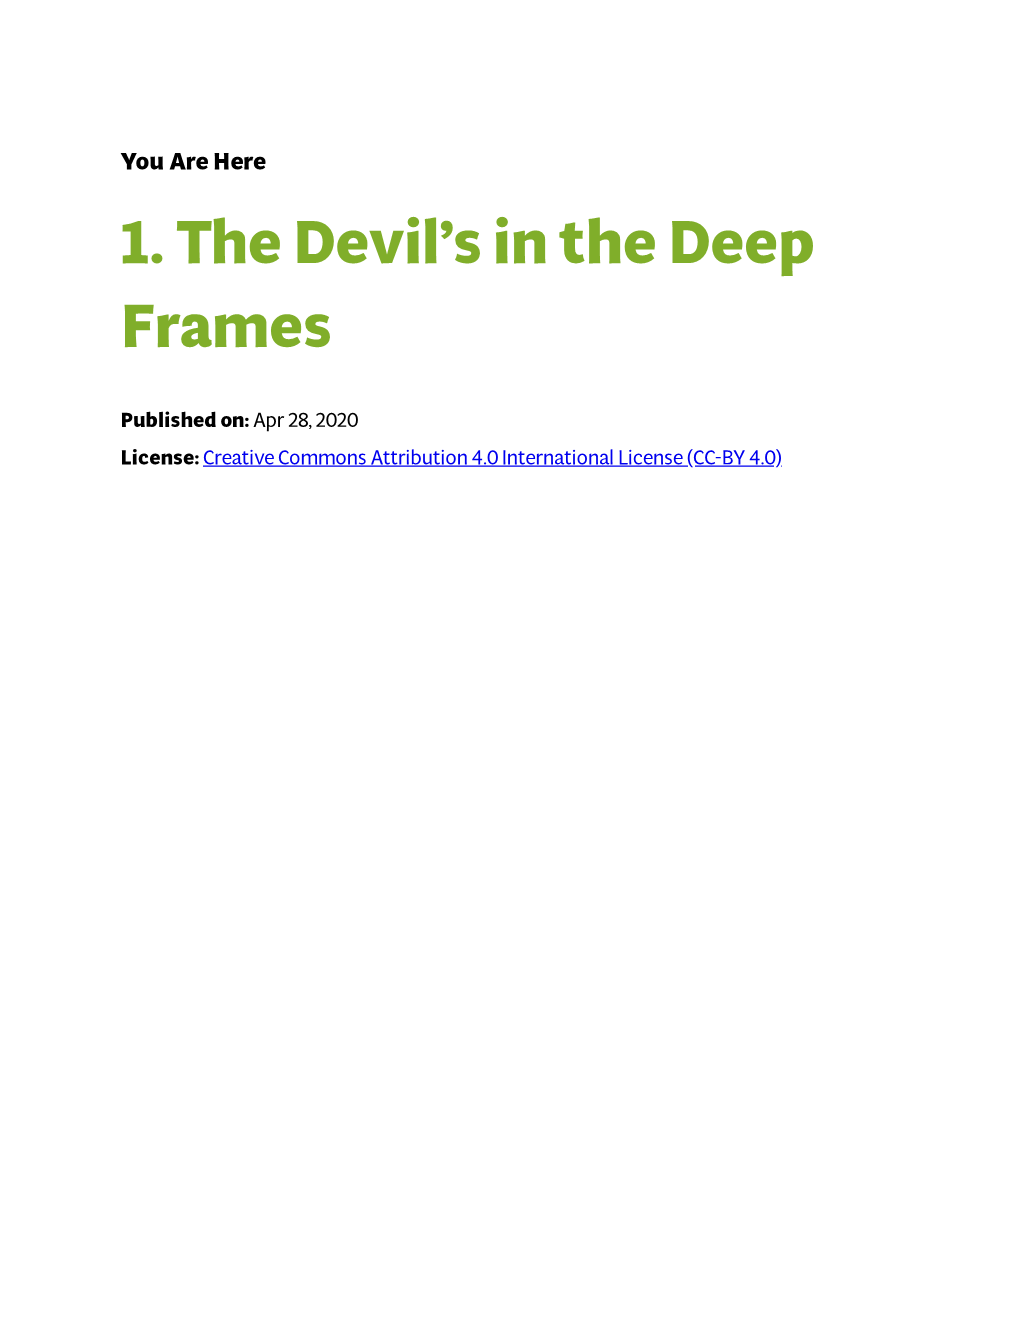 1. the Devilˇs in the Deep Frames